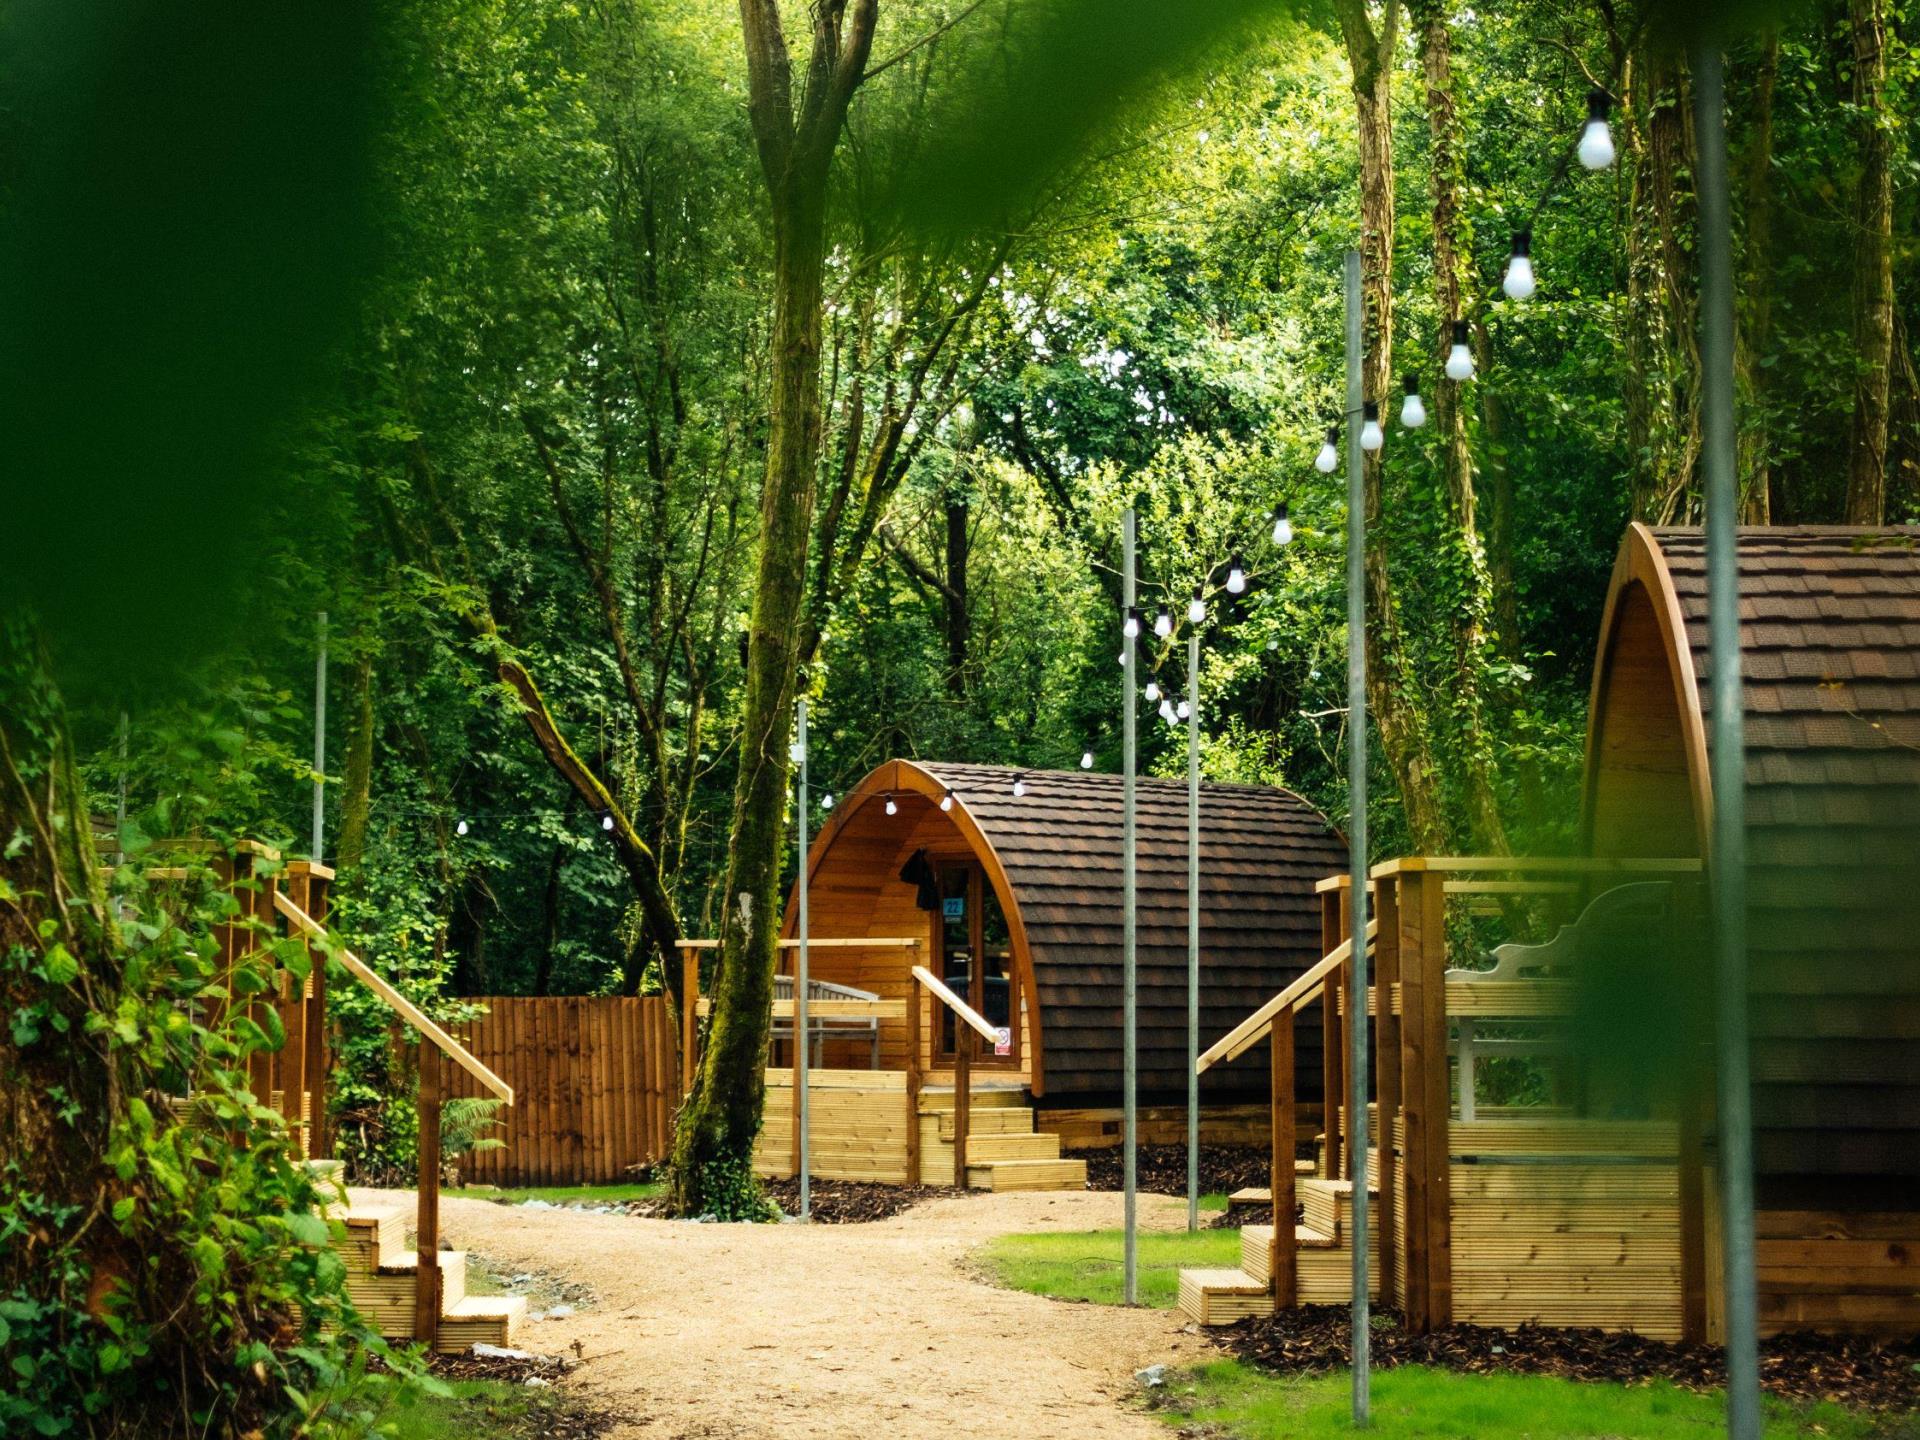 Glamping pods in a woodland setting